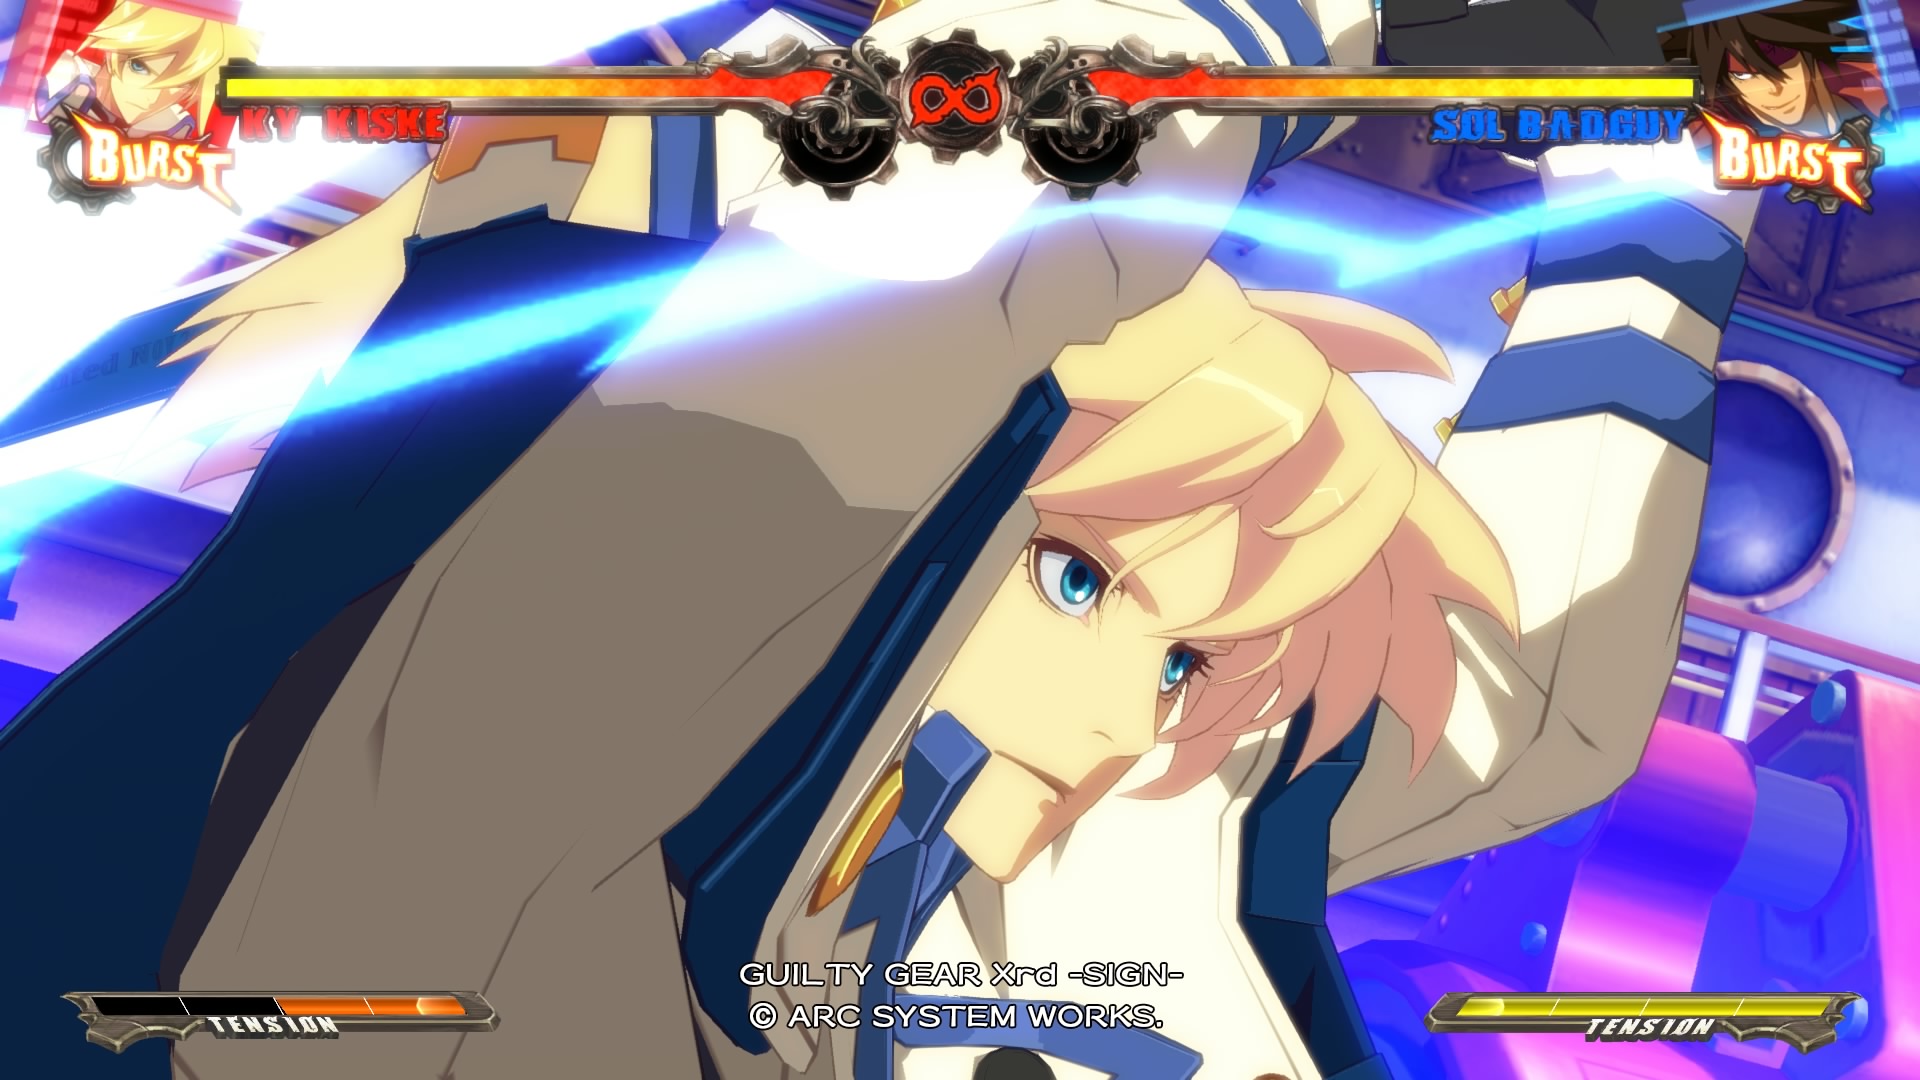 The wait is over: Guilty Gear Xrd ~Sign~ is now available in Europe on PS3 & PS4